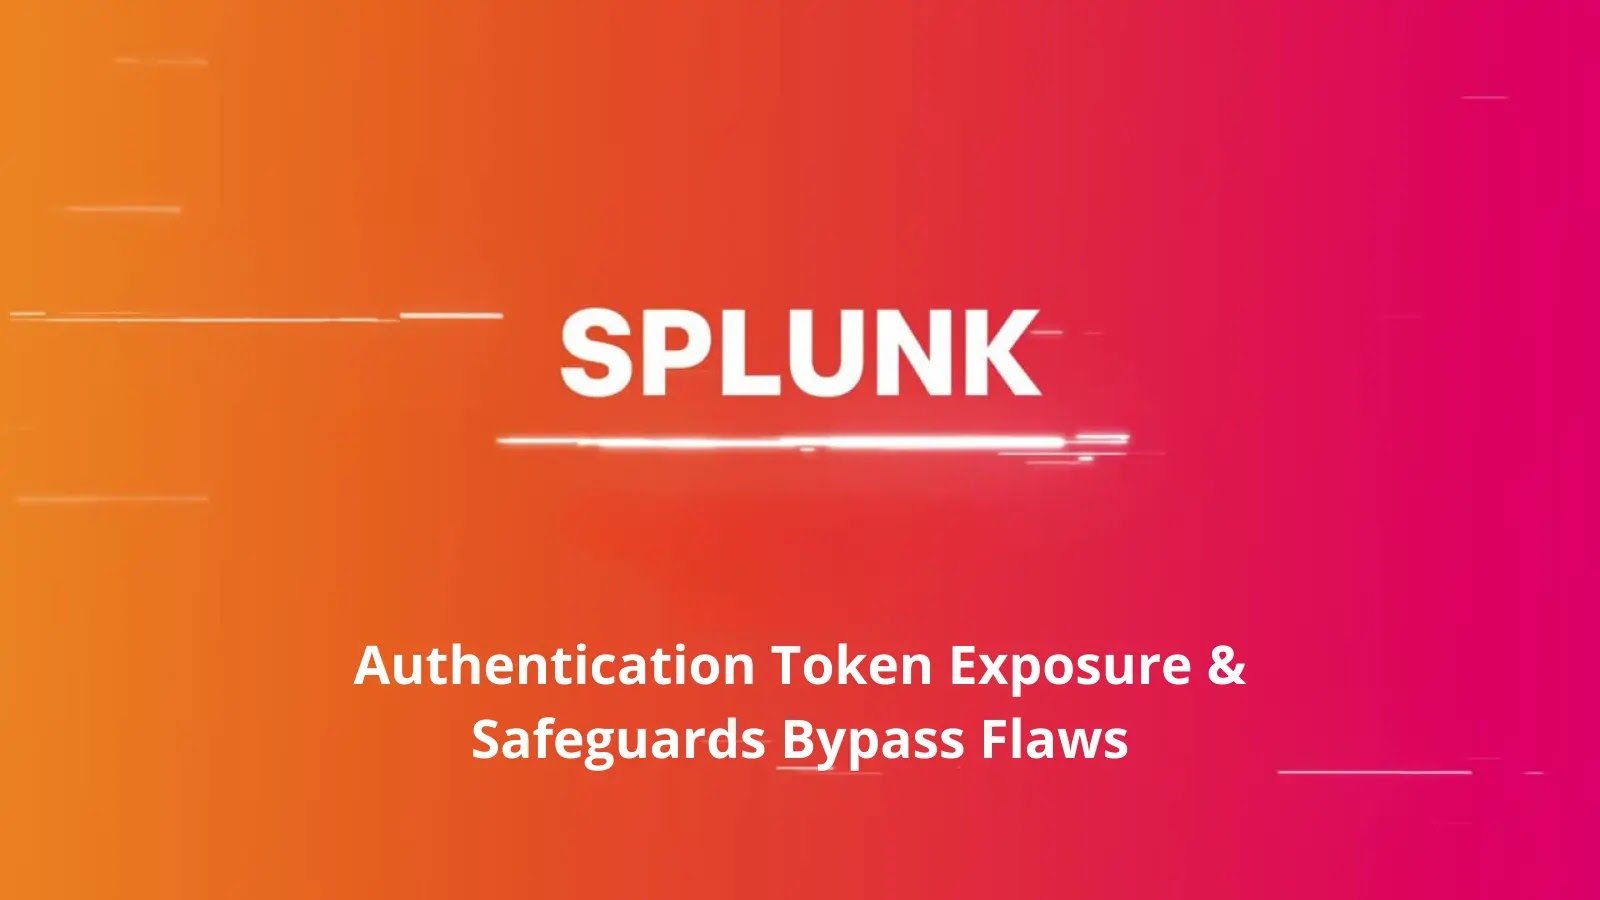 Authentication Token Exposure & Safeguards Bypass Flaws